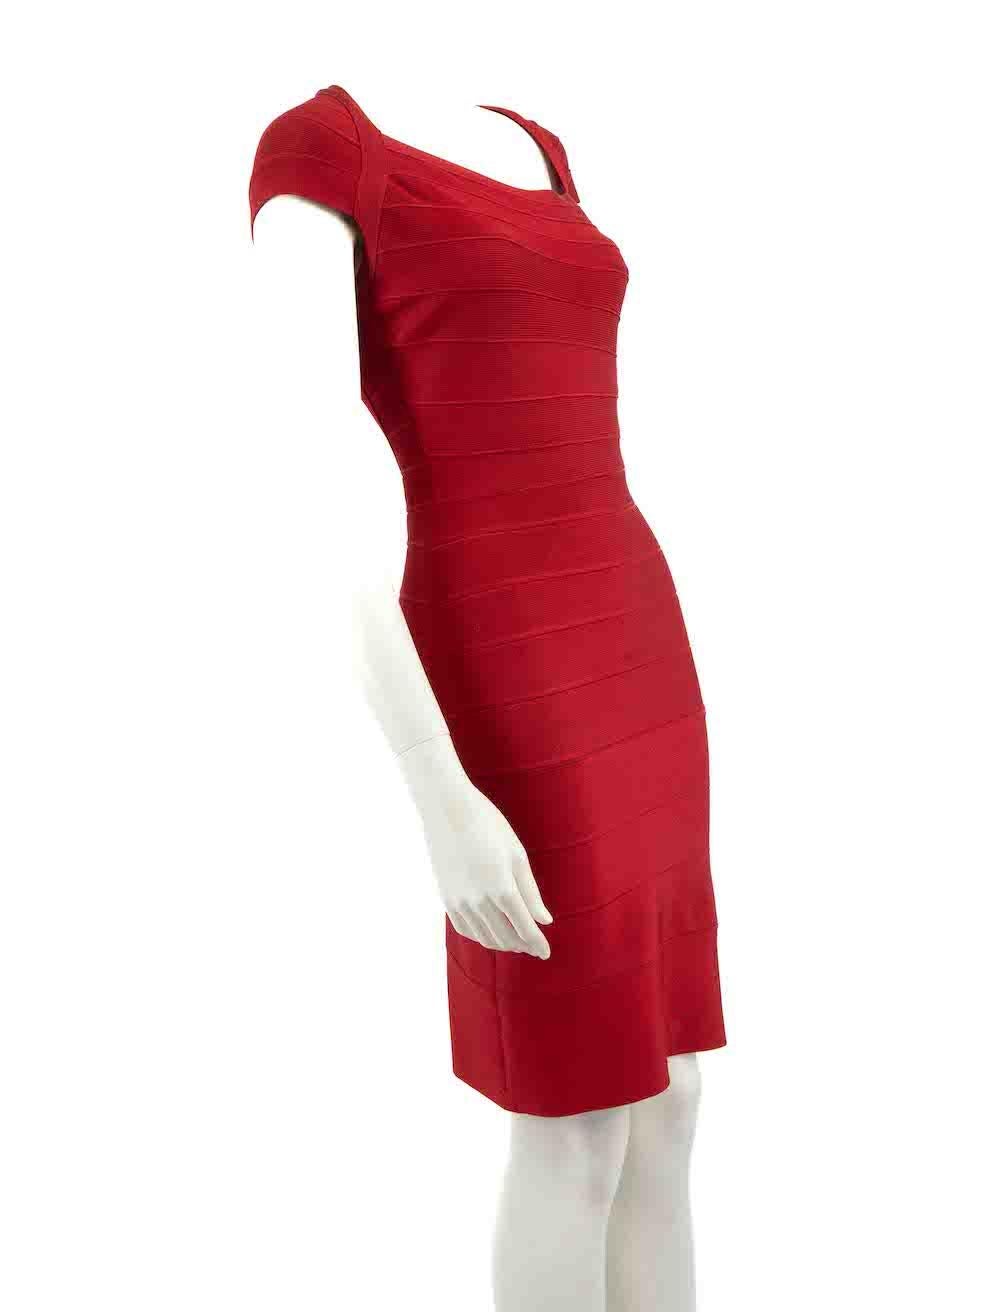 CONDITION is Good. General wear to dress is evident. Moderate signs of wear to the rear with pilling to the weave and the brand label at the rear neckline lining has come detached ay one side on this used Herve Leger designer resale item.
 
 
 
